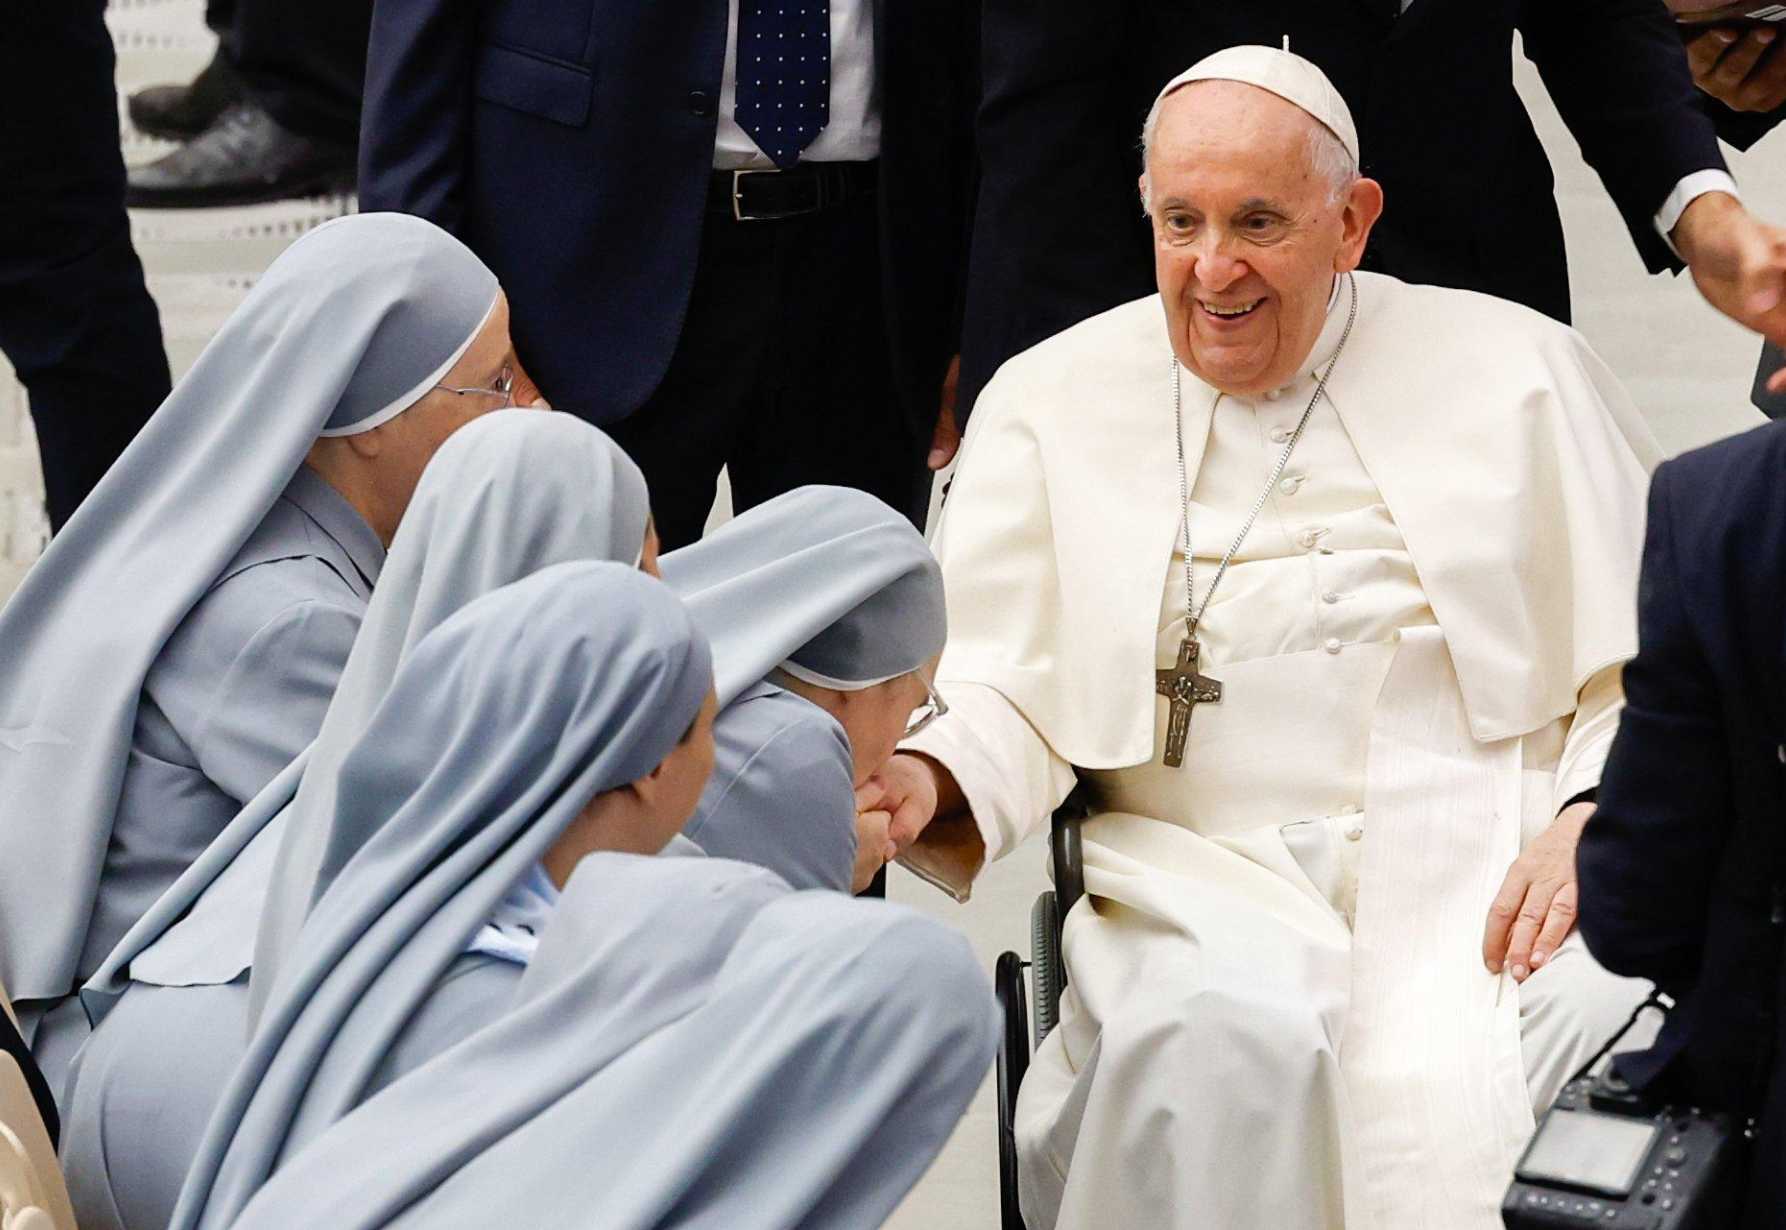 Adoration awakens love for the poor, commitment to justice, pope says